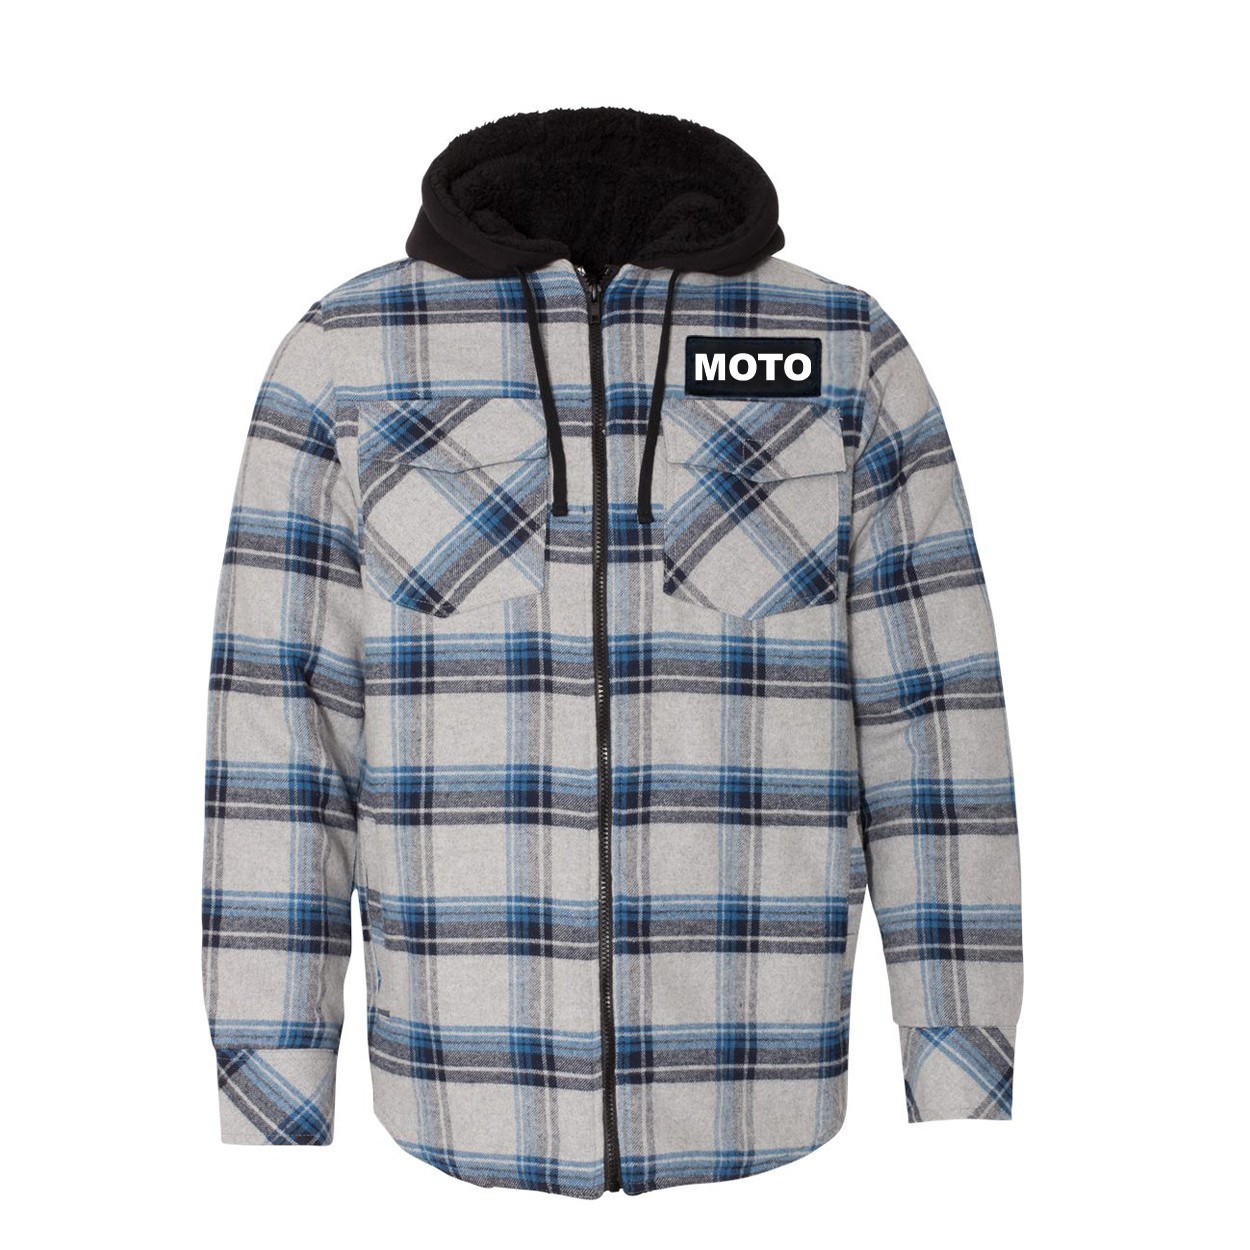 Moto Brand Logo Classic Unisex Full Zip Woven Patch Hooded Flannel Jacket Gray/ Blue